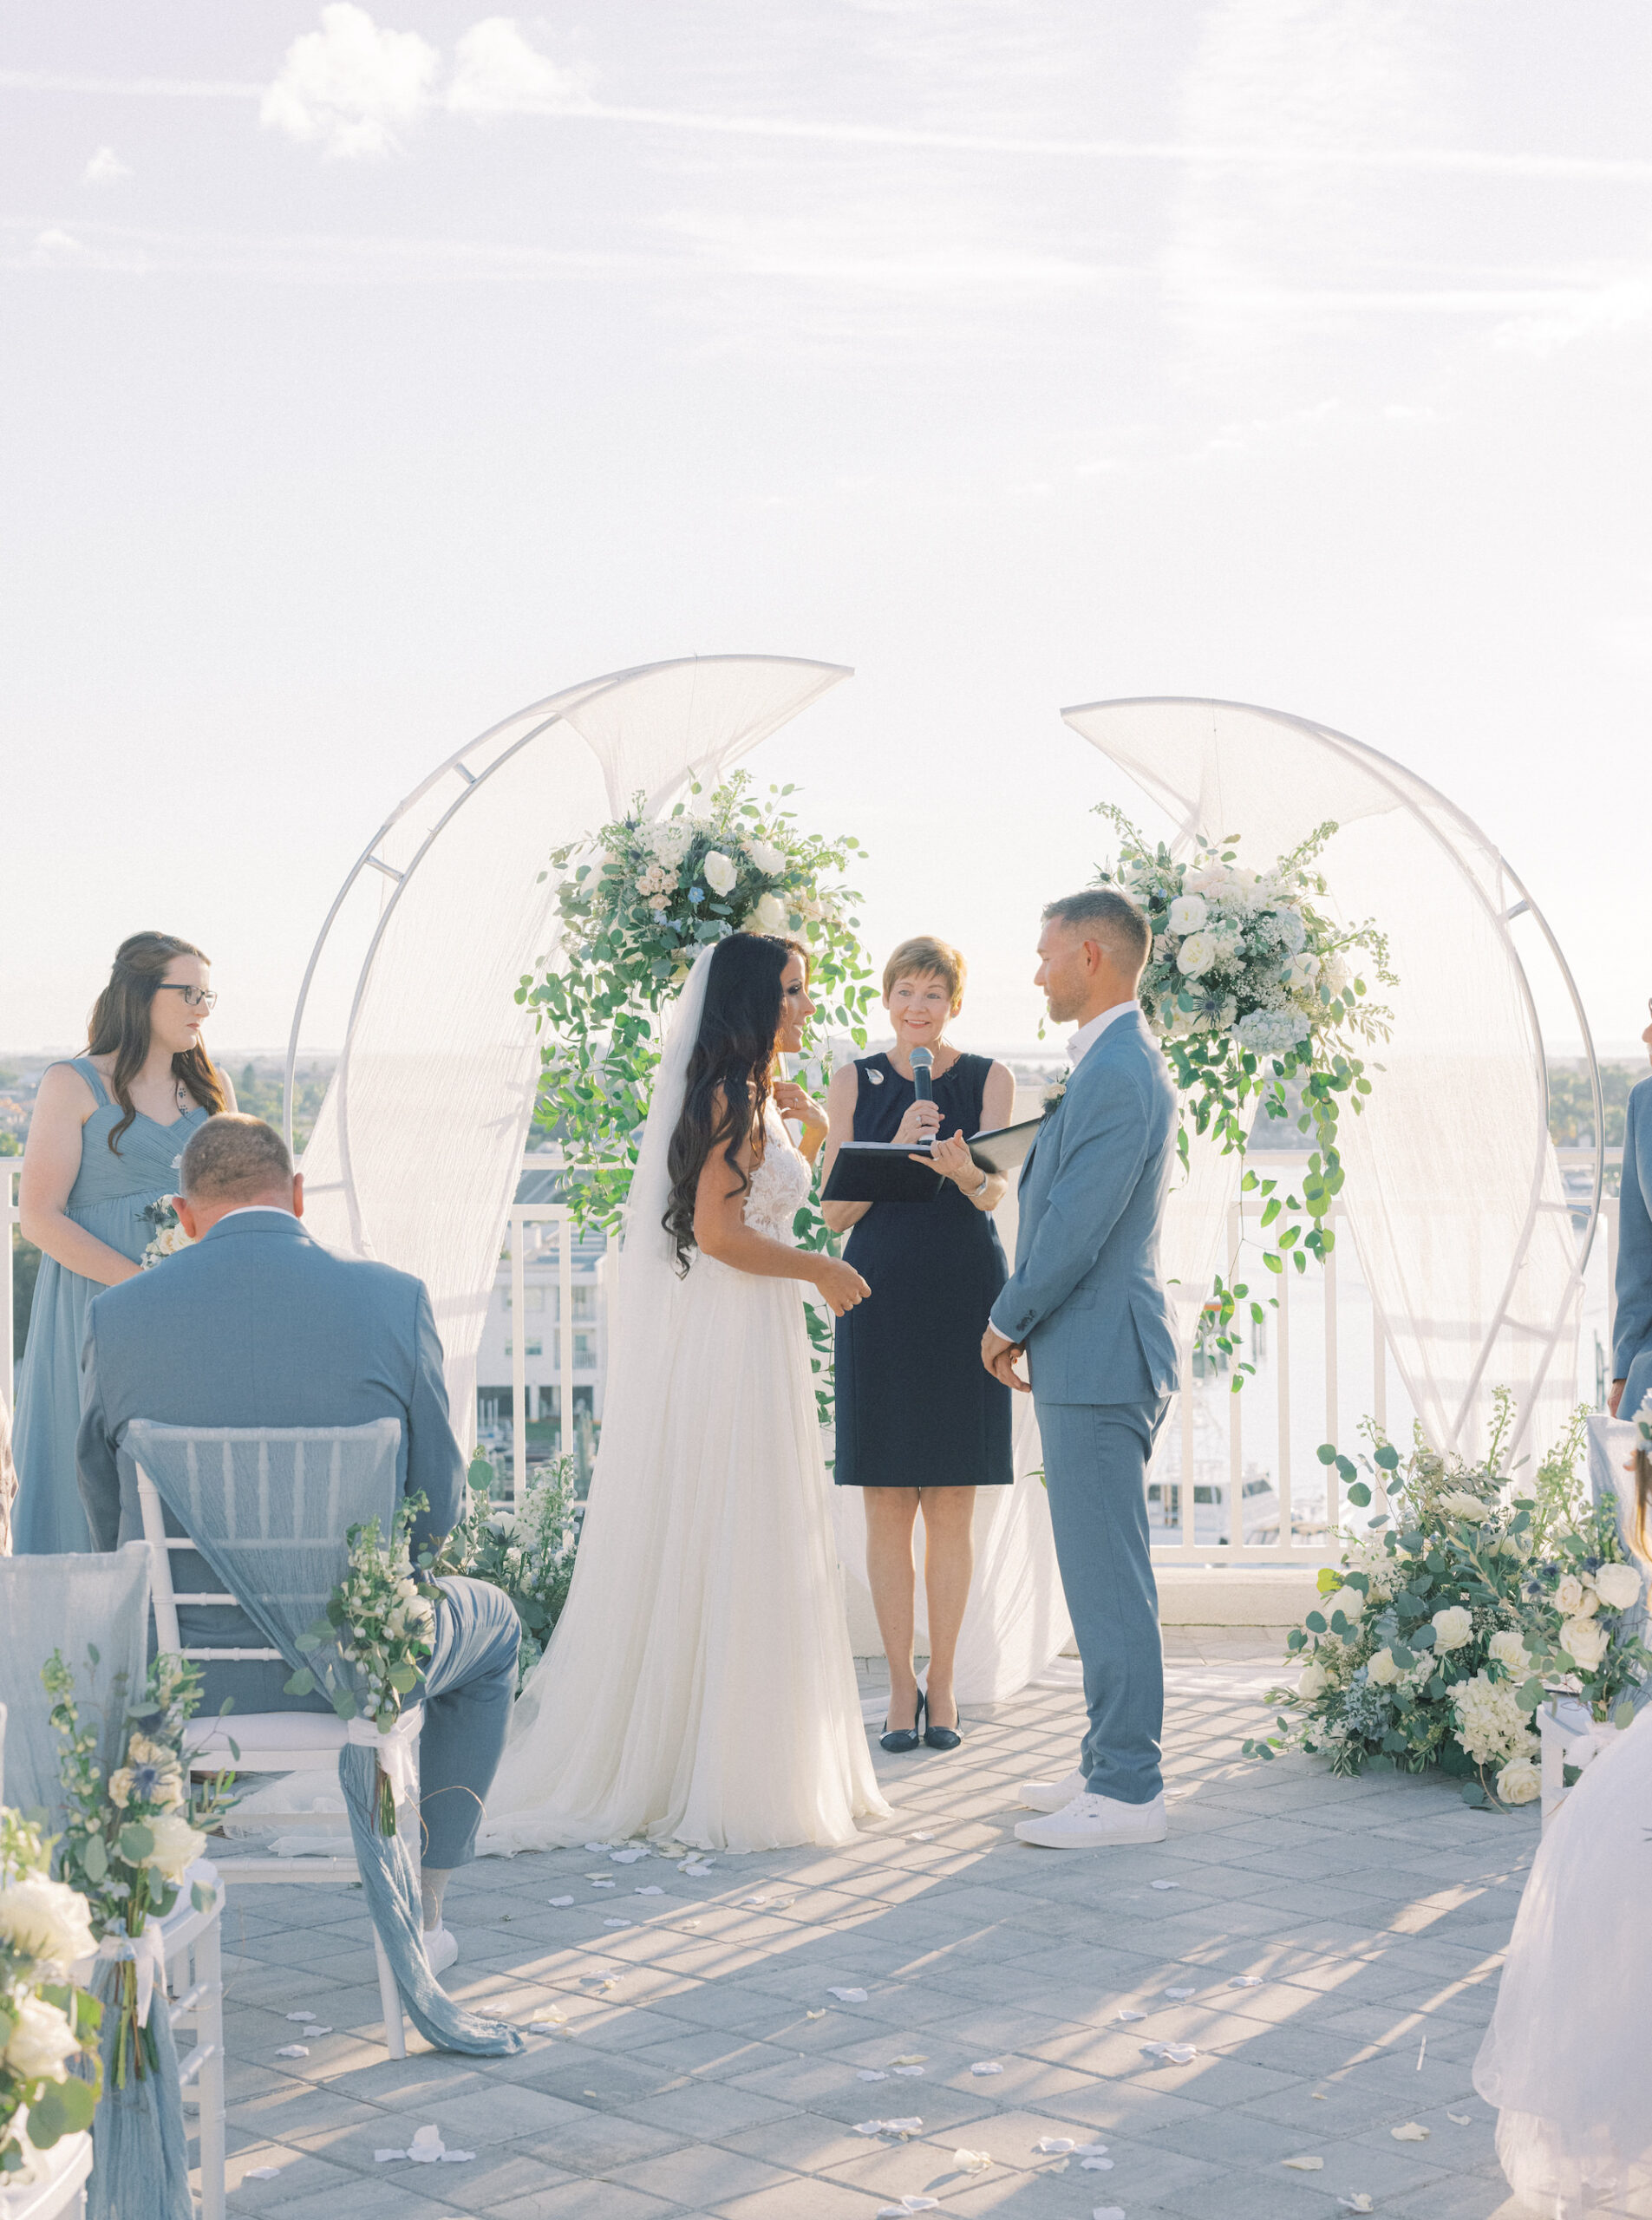 Bride and Groom Exchange Vows | Outdoor Romantic Wedding Ceremony with White Chairs | Two Half Circle Arch with White Floral and Greenery Details | Tampa Wedding Officiant A Wedding with Grace